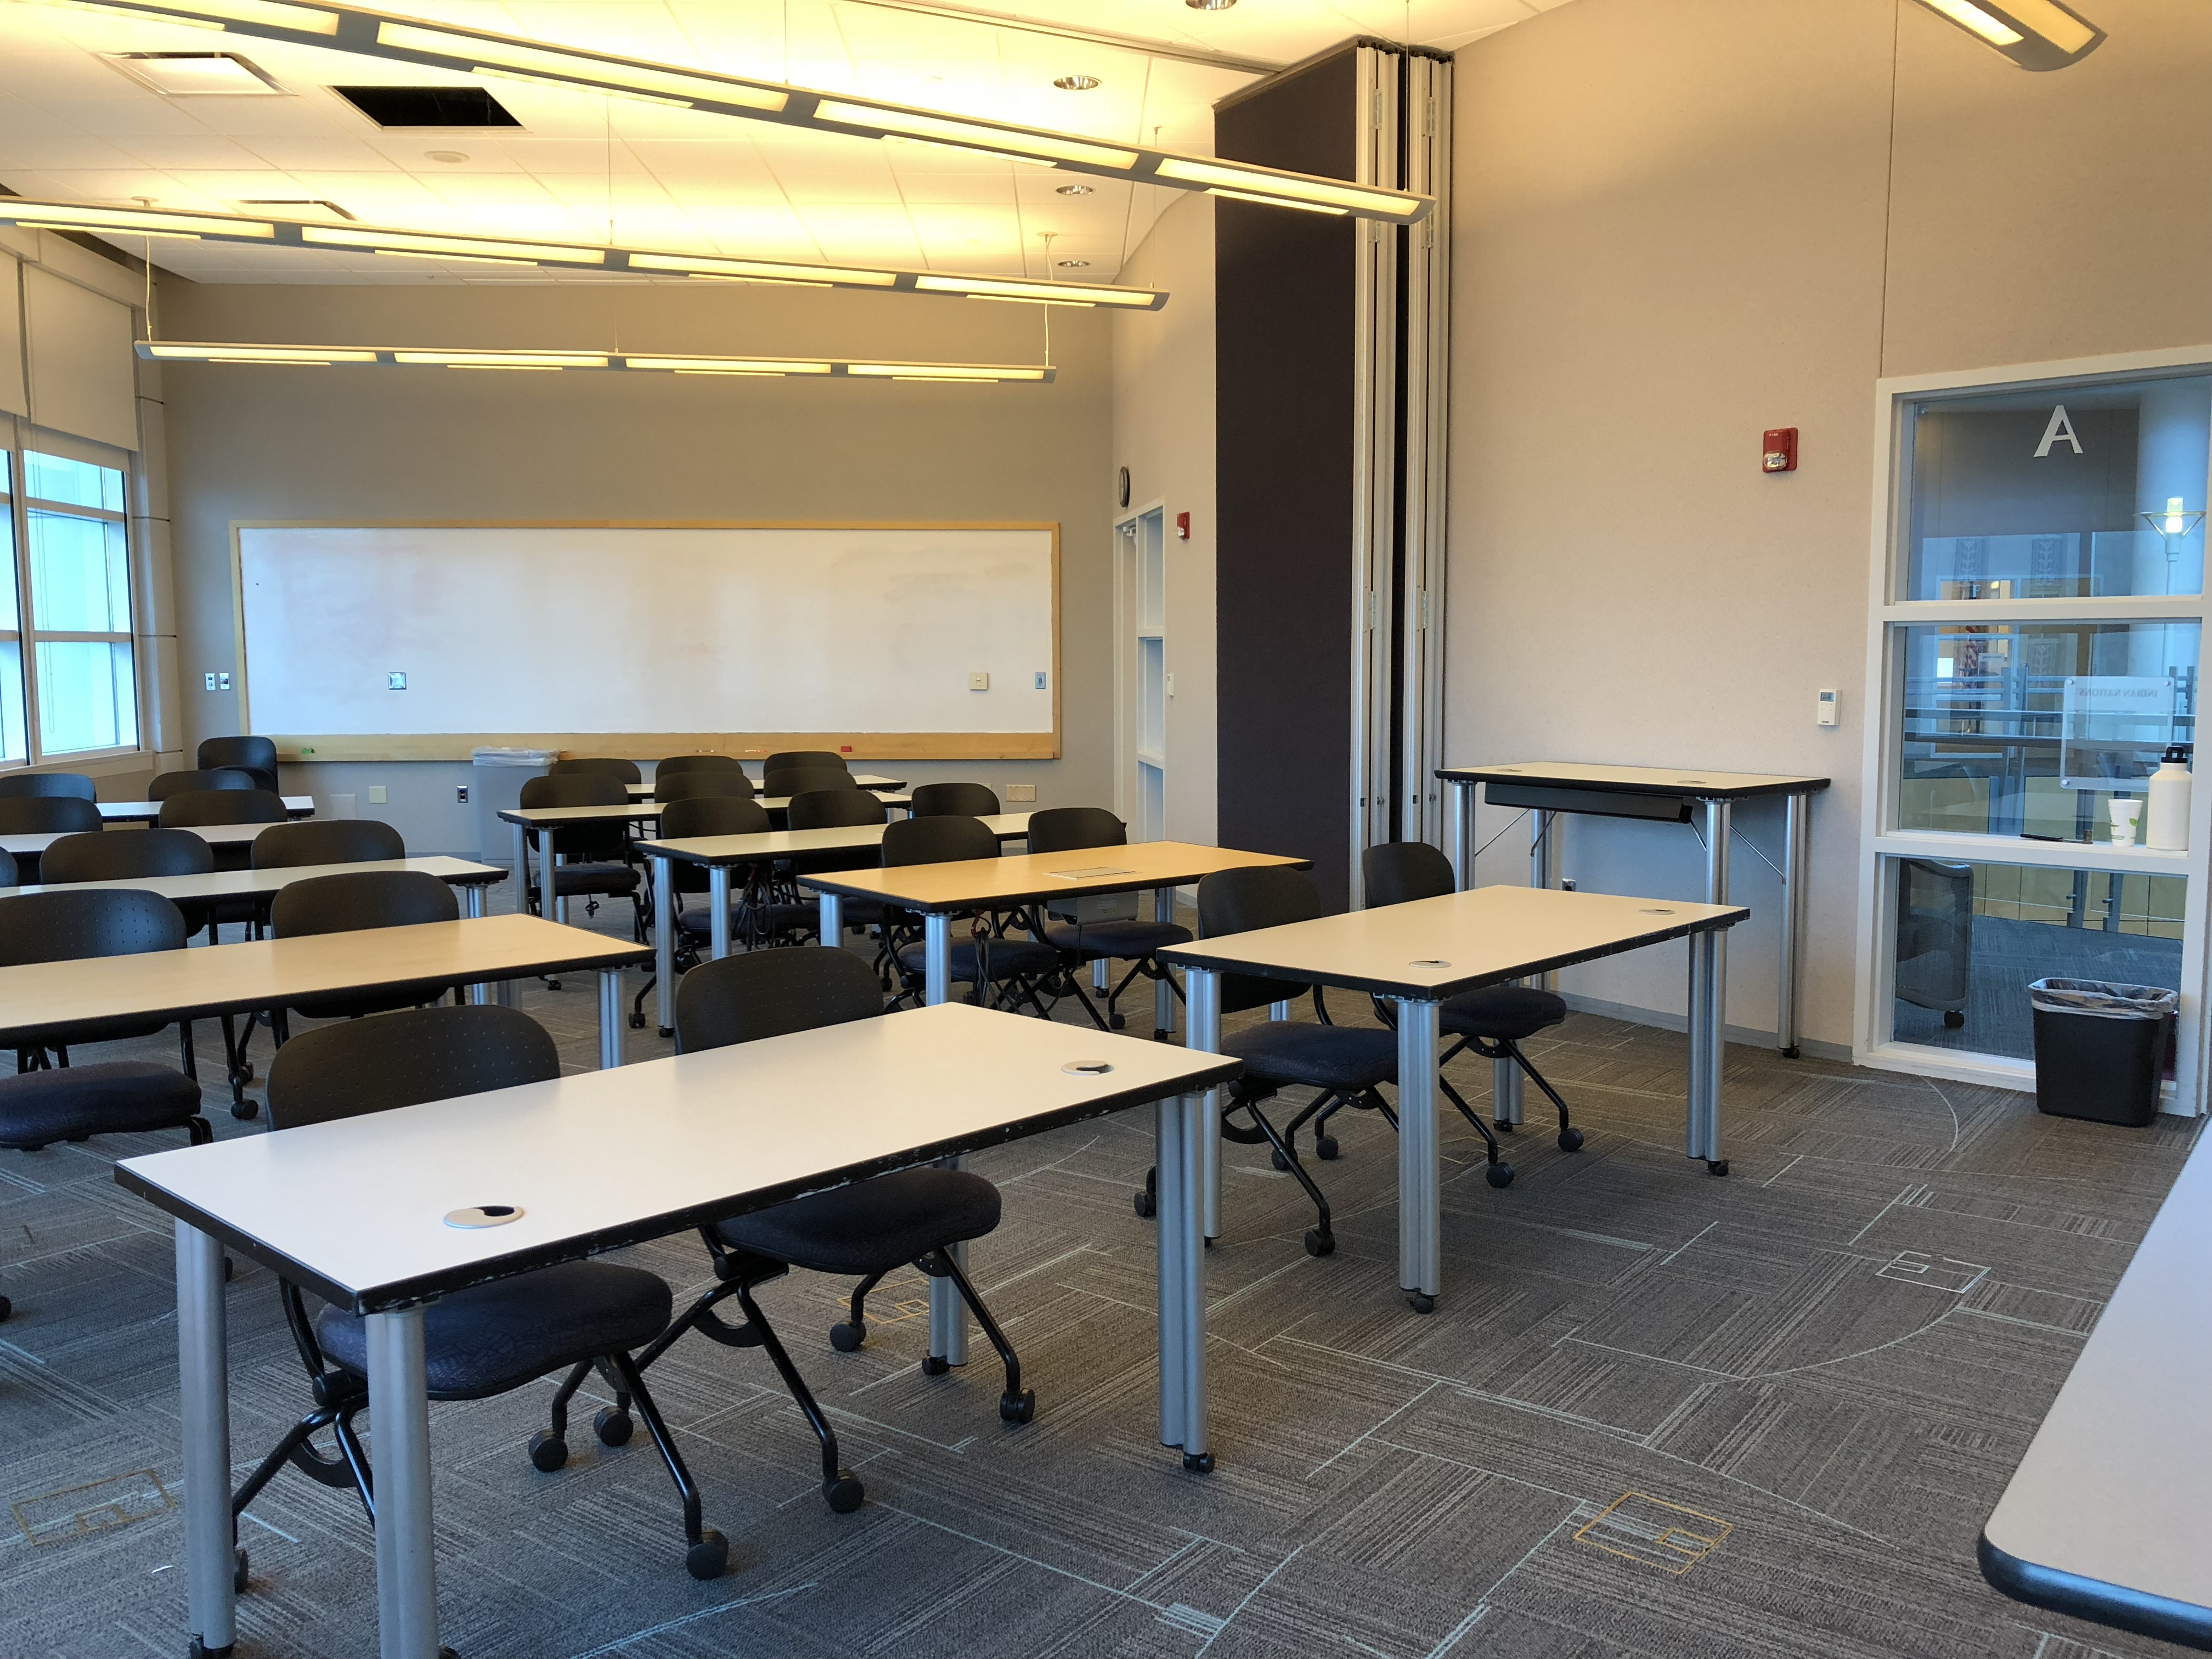 Classroom CD at Downtown Library with classroom-style seating